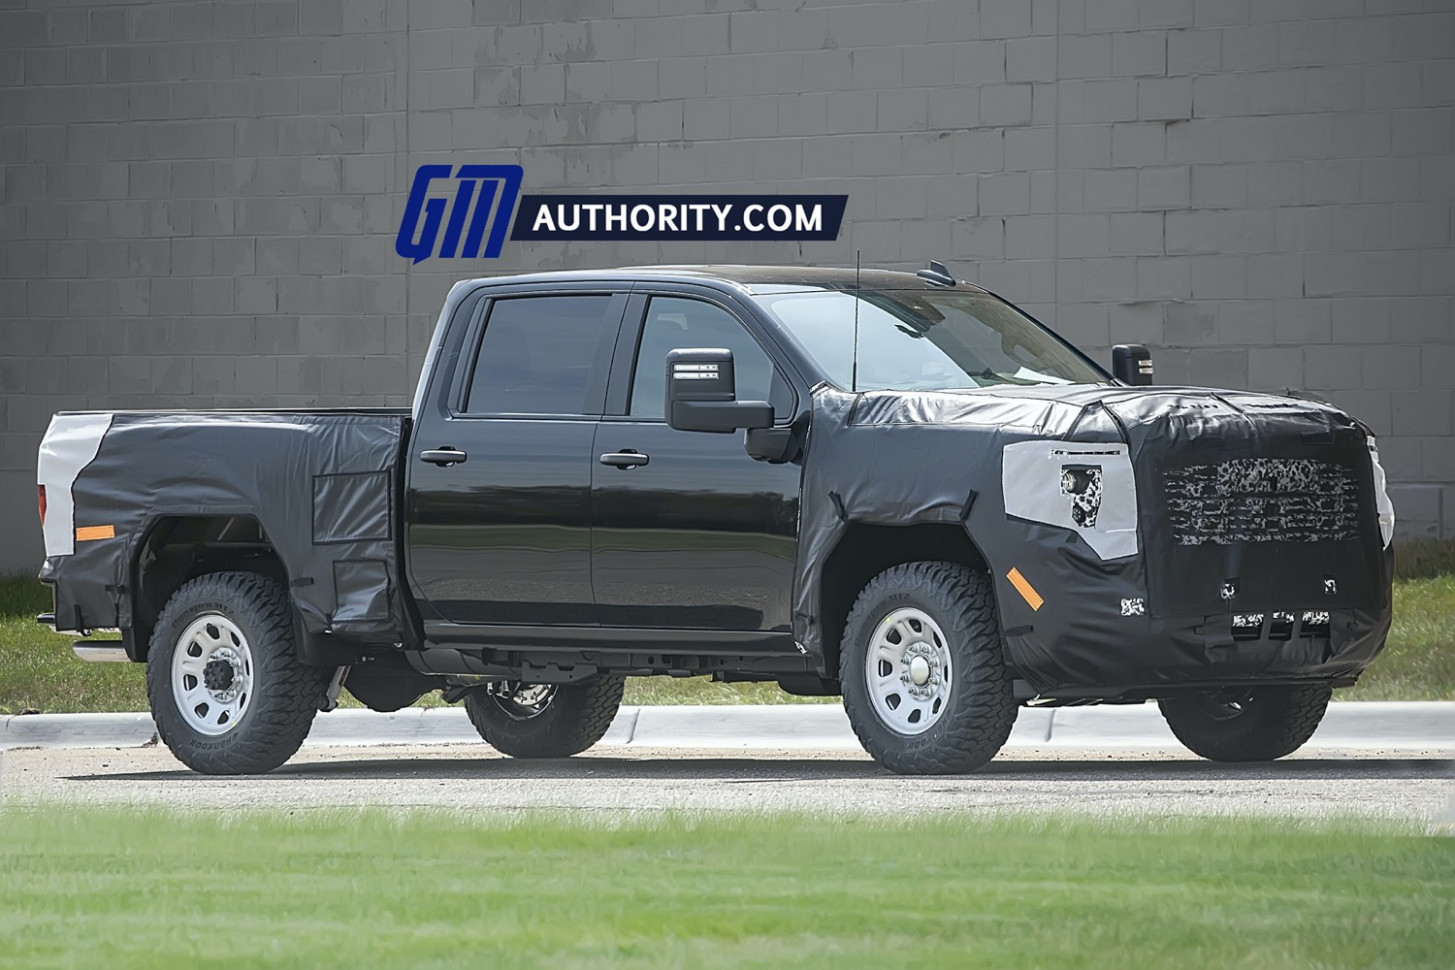 Price and Review When Will The 2023 Gmc 2500 Be Released